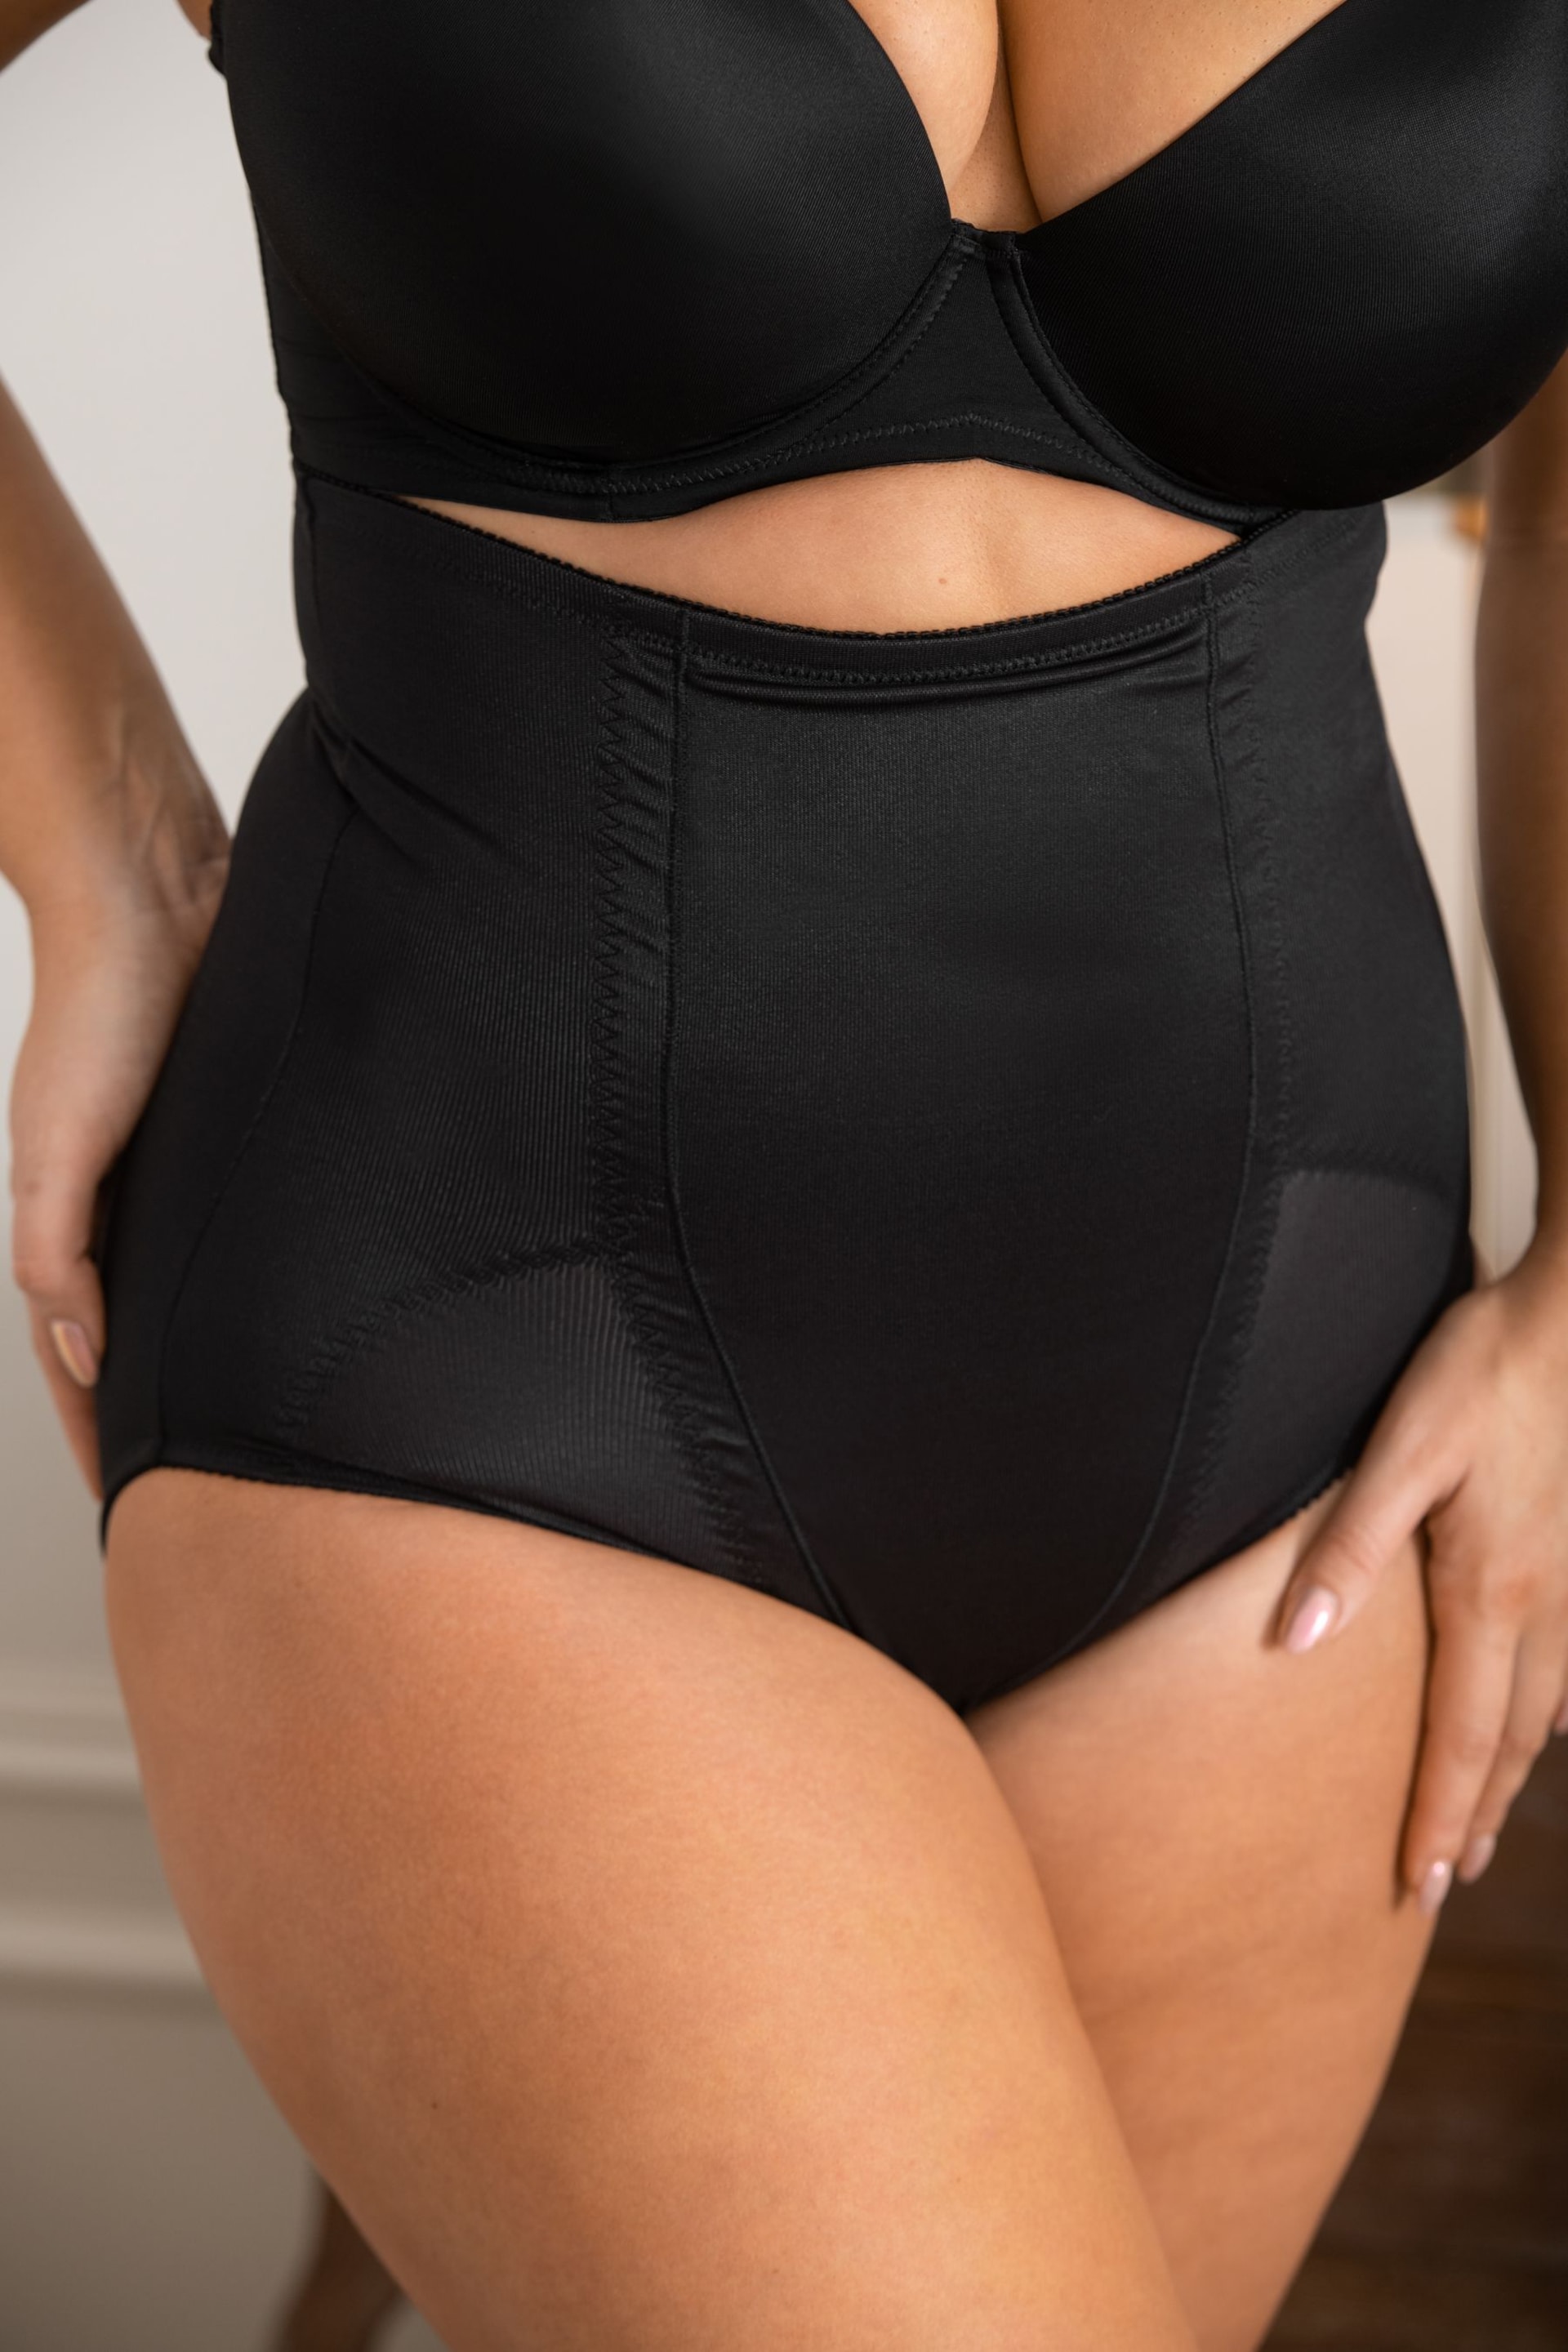 Pour Moi Black Lingerie Hourglass Shapewear Firm Tummy Control High Waist Knickers - Image 3 of 5